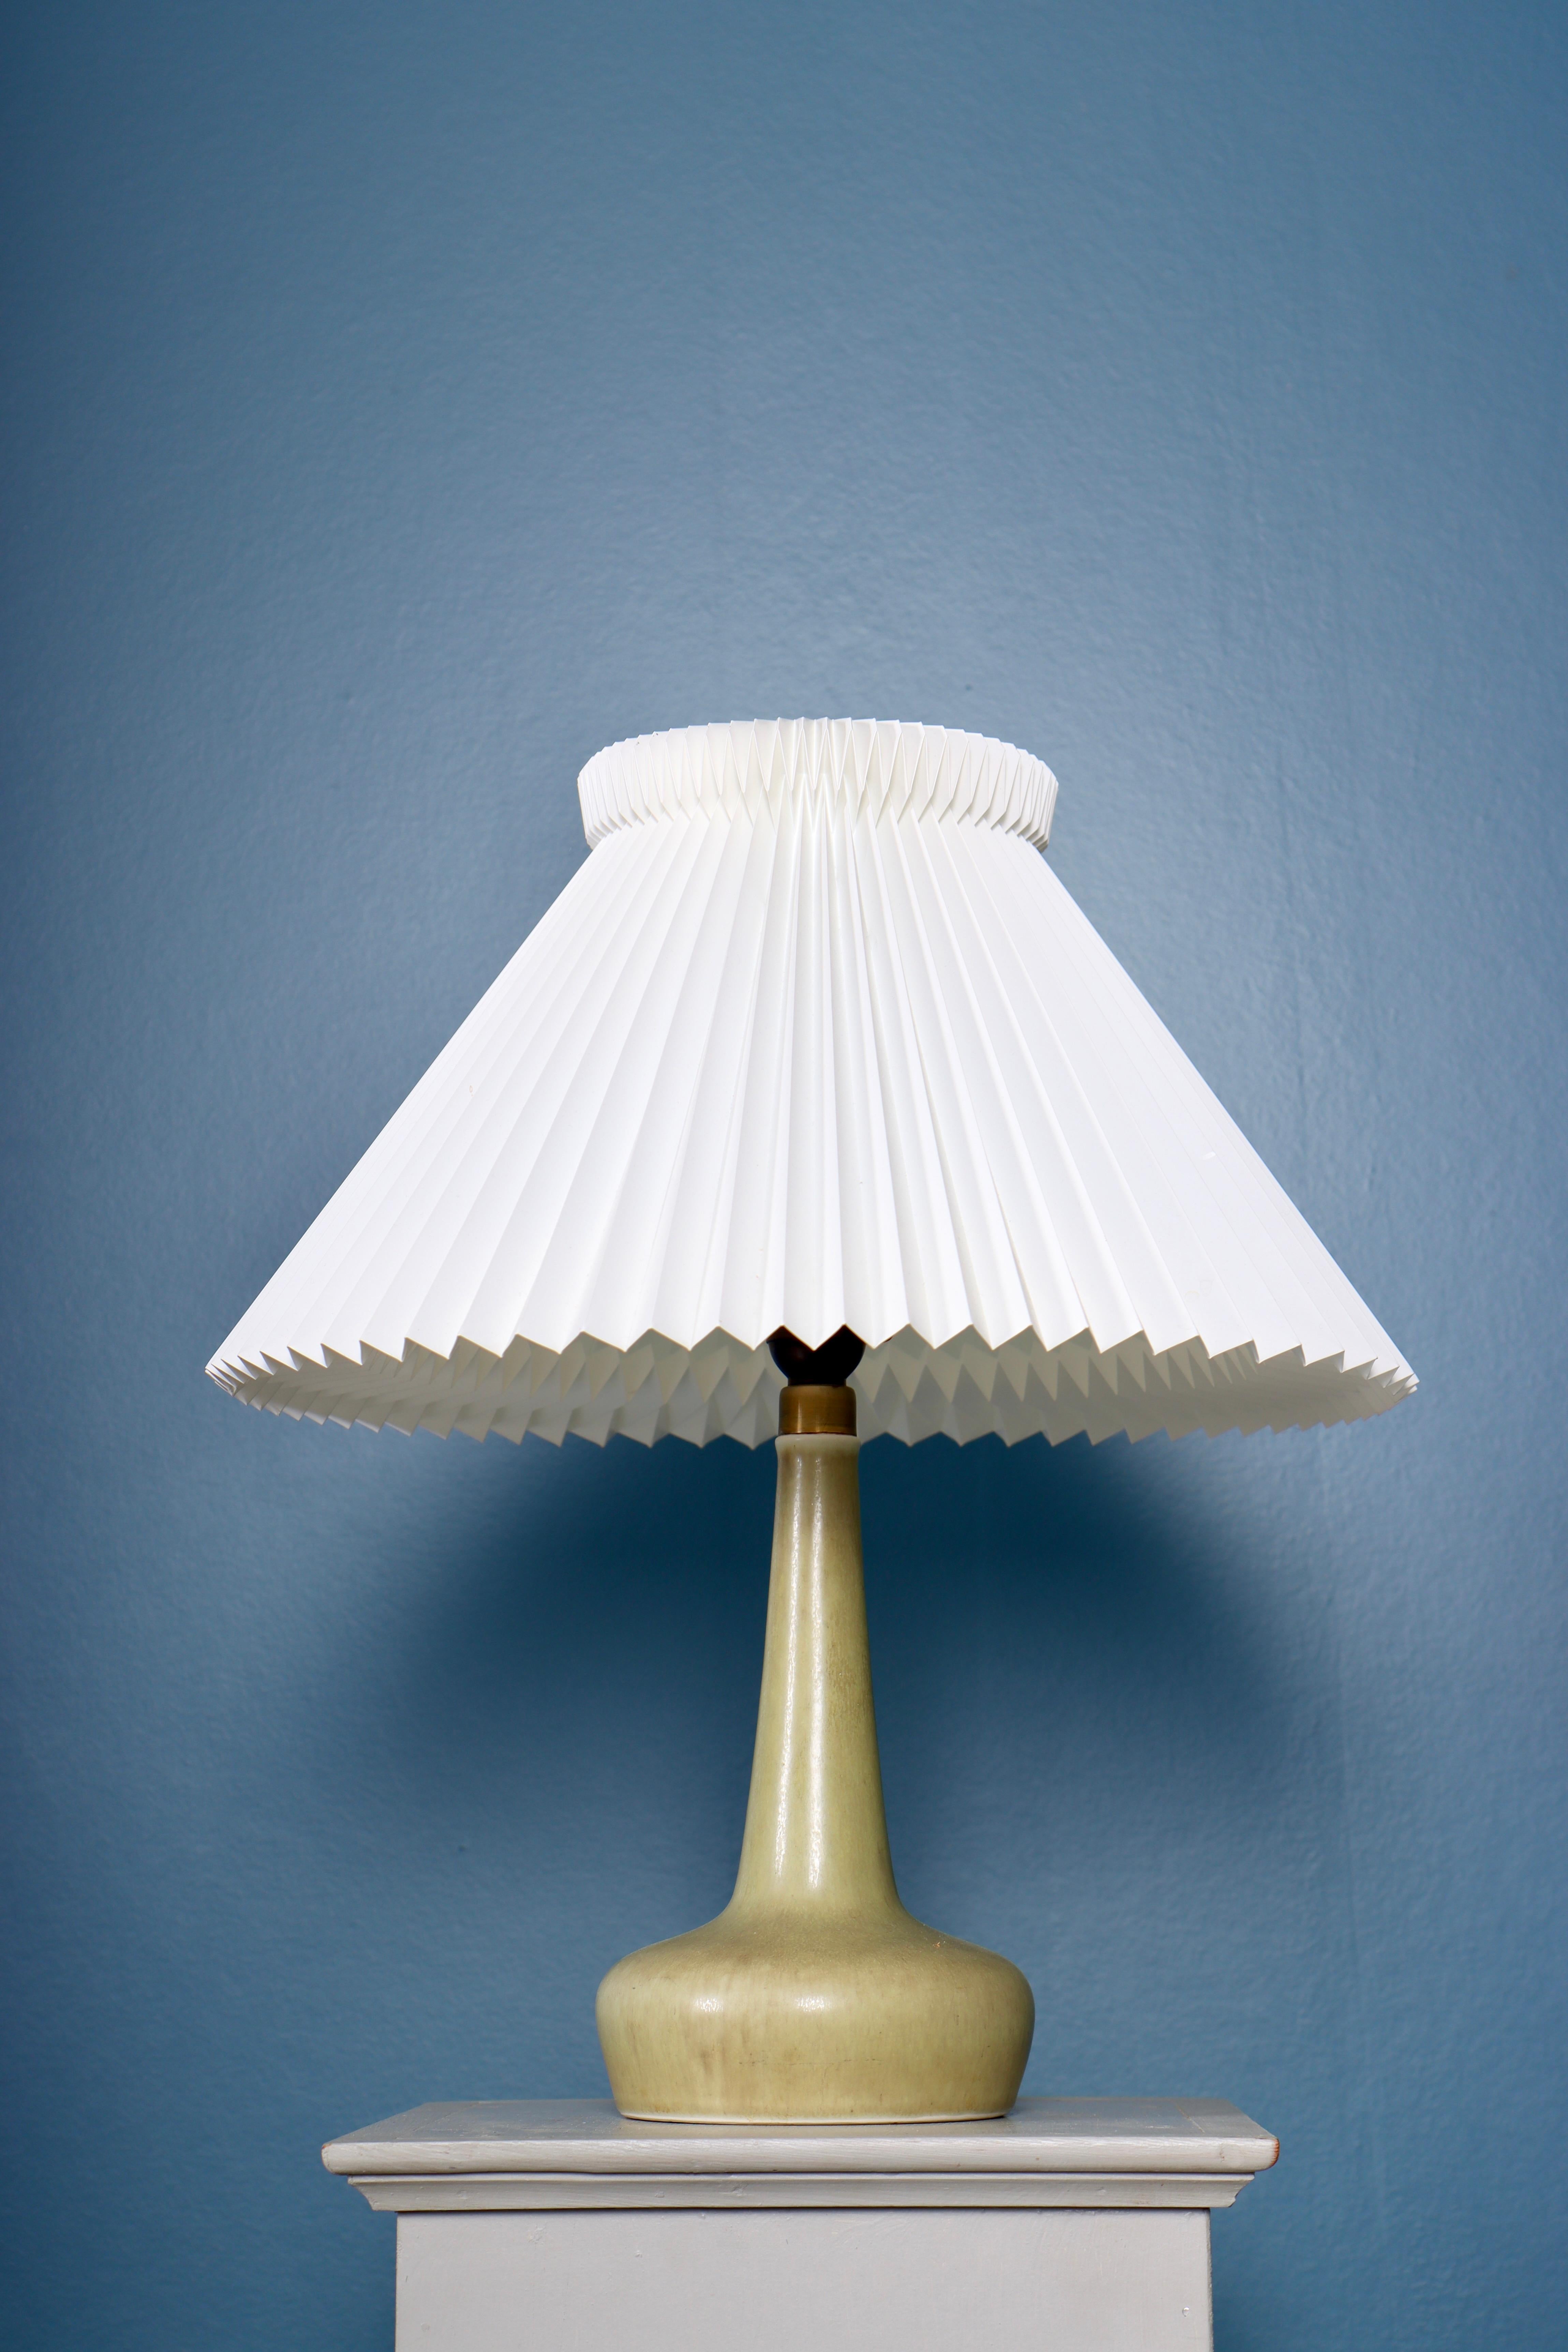 Decorative ceramic lamp designed by Palshus, Made in Denmark in the 1960s. Great original condition.